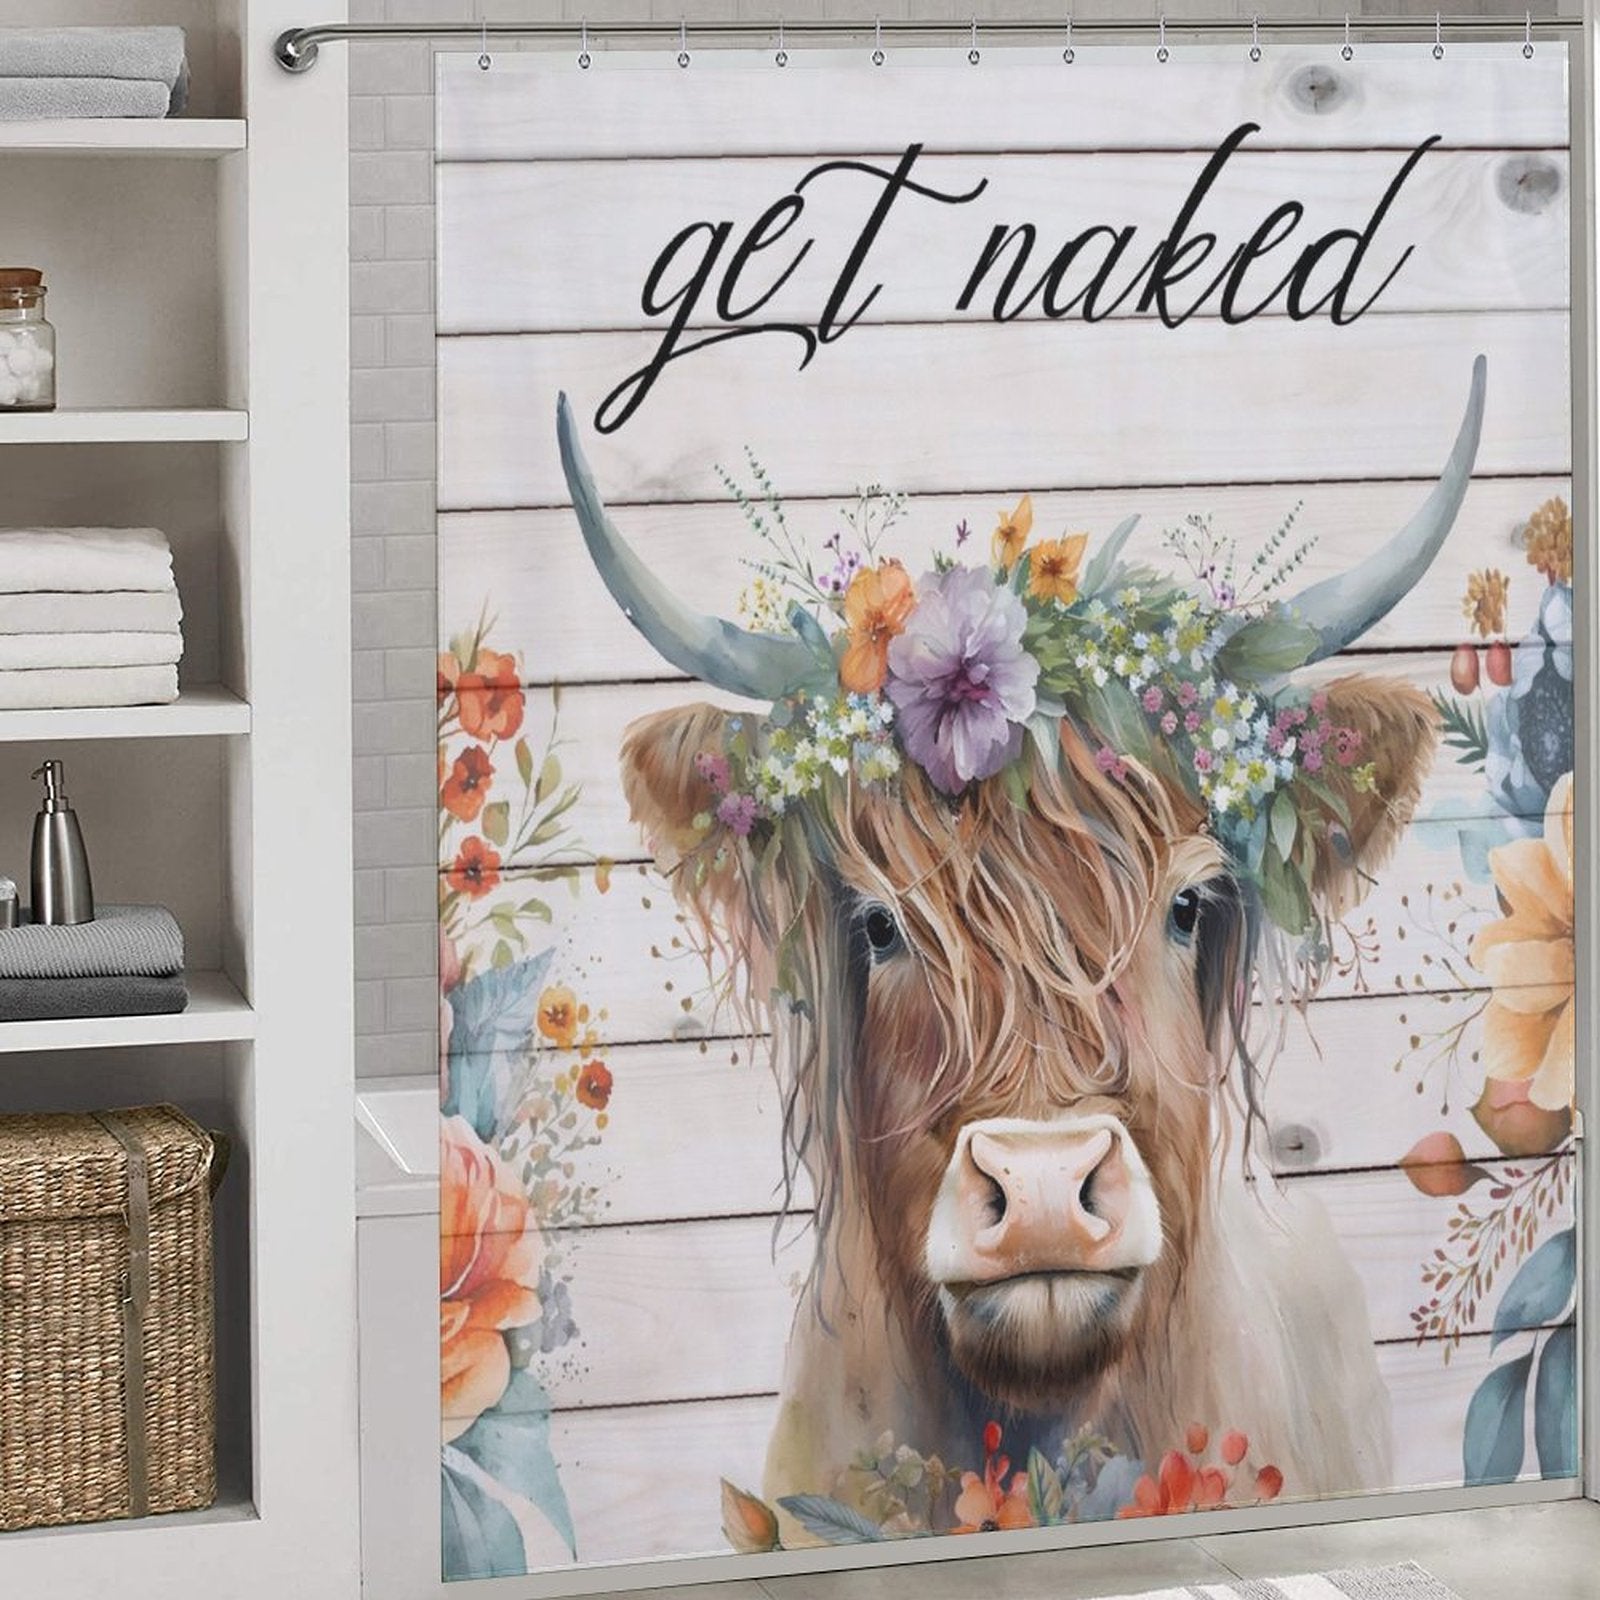 The Funny Letters Get Naked Flower Highland Cow Shower Curtain-Cottoncat by Cotton Cat features an image of a Highland cow wearing a floral crown, coupled with the cheeky text "get naked" at the top. The backdrop showcases a wooden plank design adorned with additional floral decorations, adding a rustic charm to your bathroom.